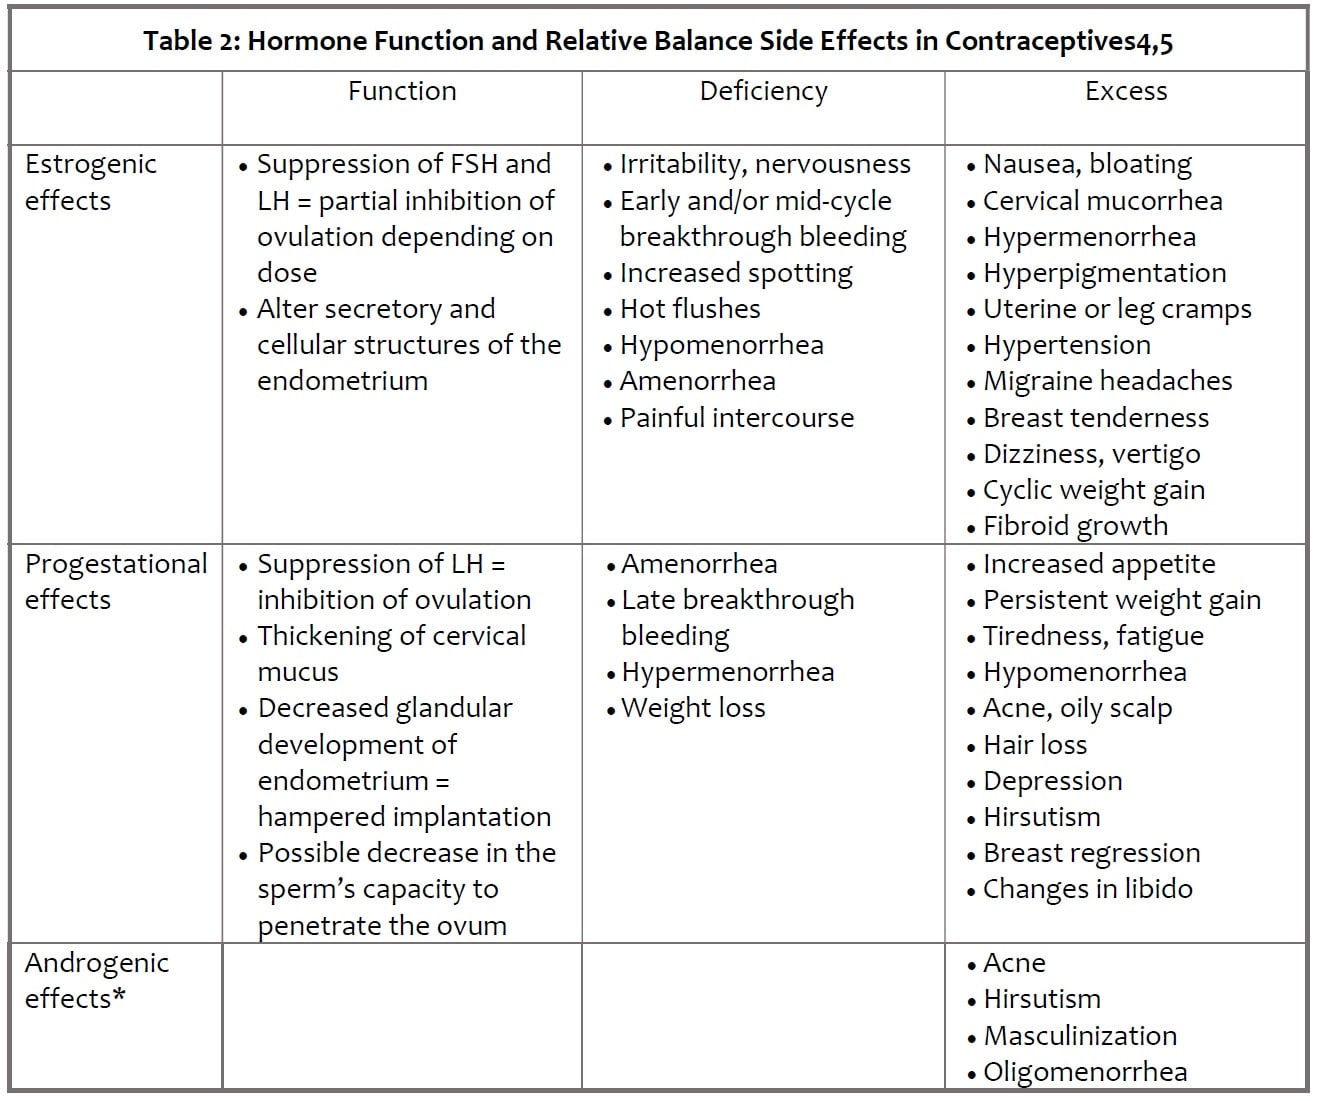 Table 2 - Hormone Function and Relative Balance Side Effects in Contraceptives4